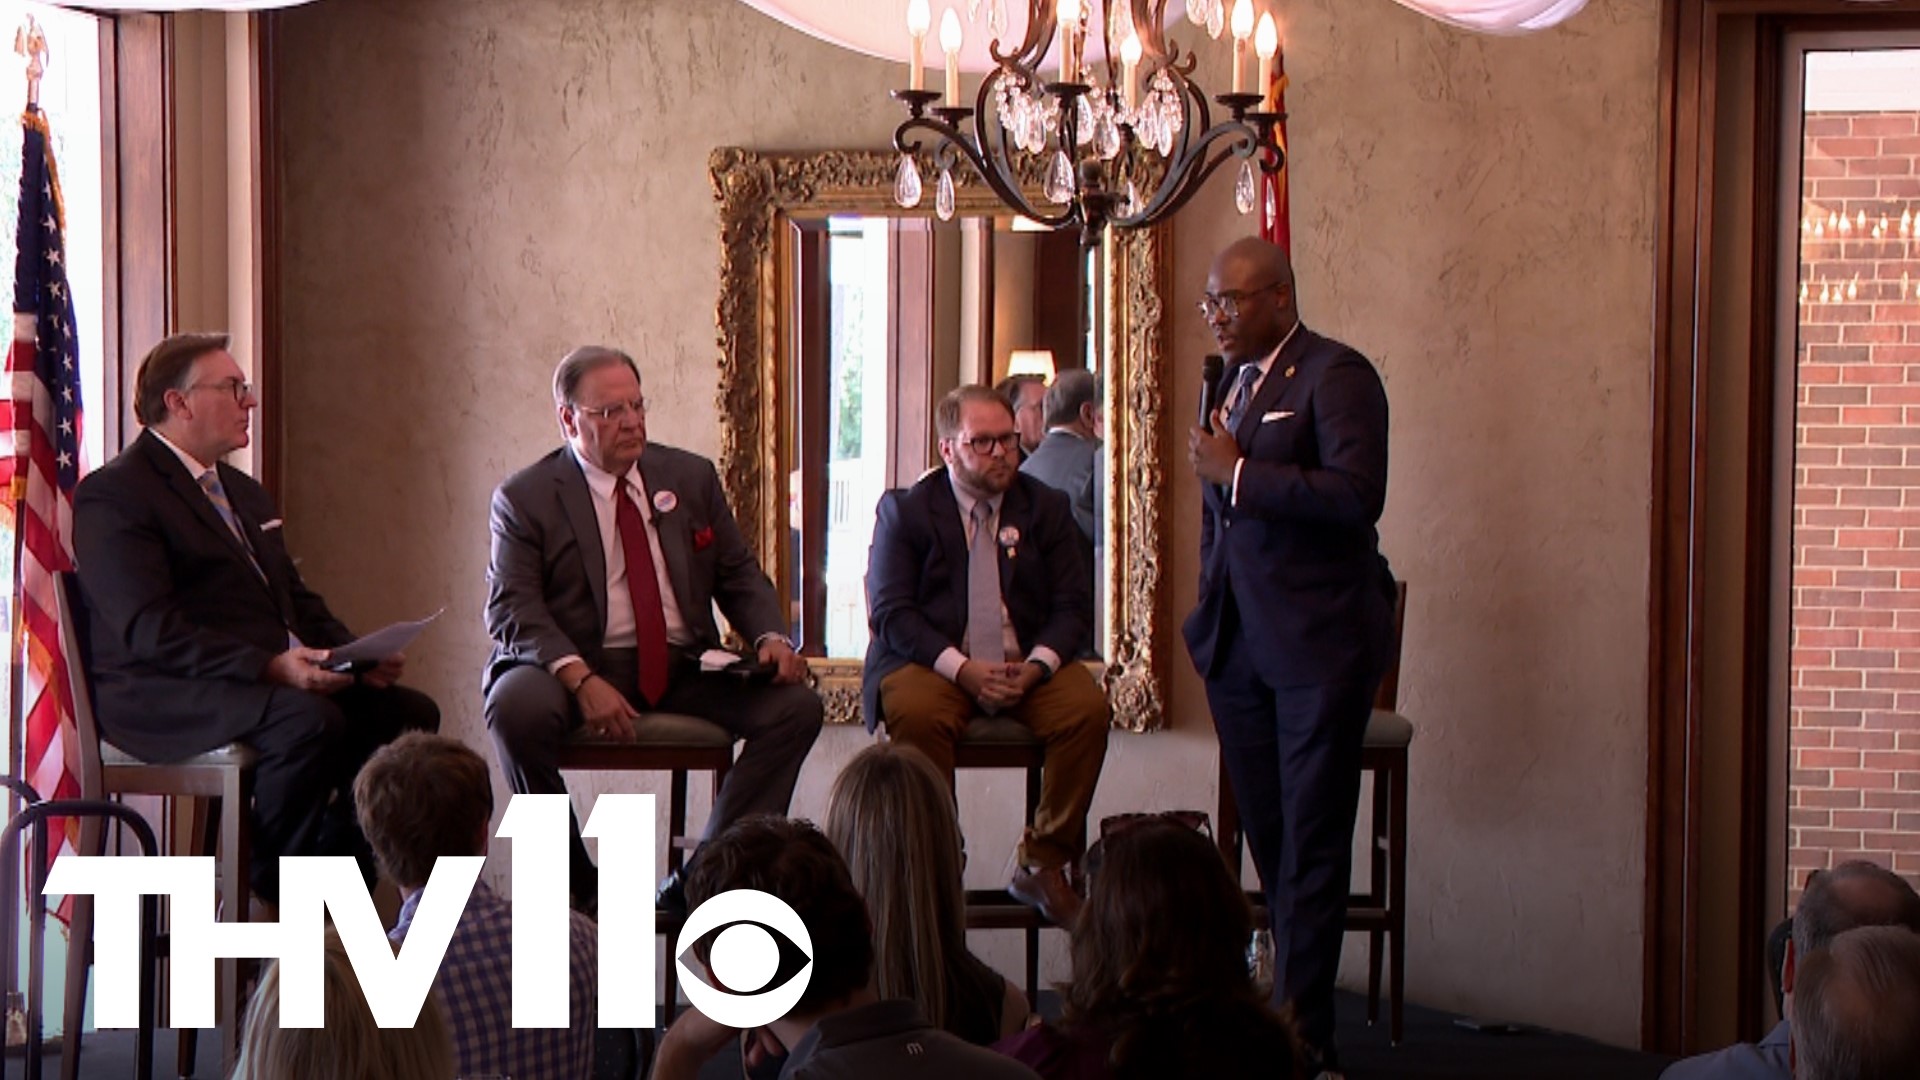 Little Rock's mayoral candidates met for the first time to talk about why they want the job and the future plans they have for the city.